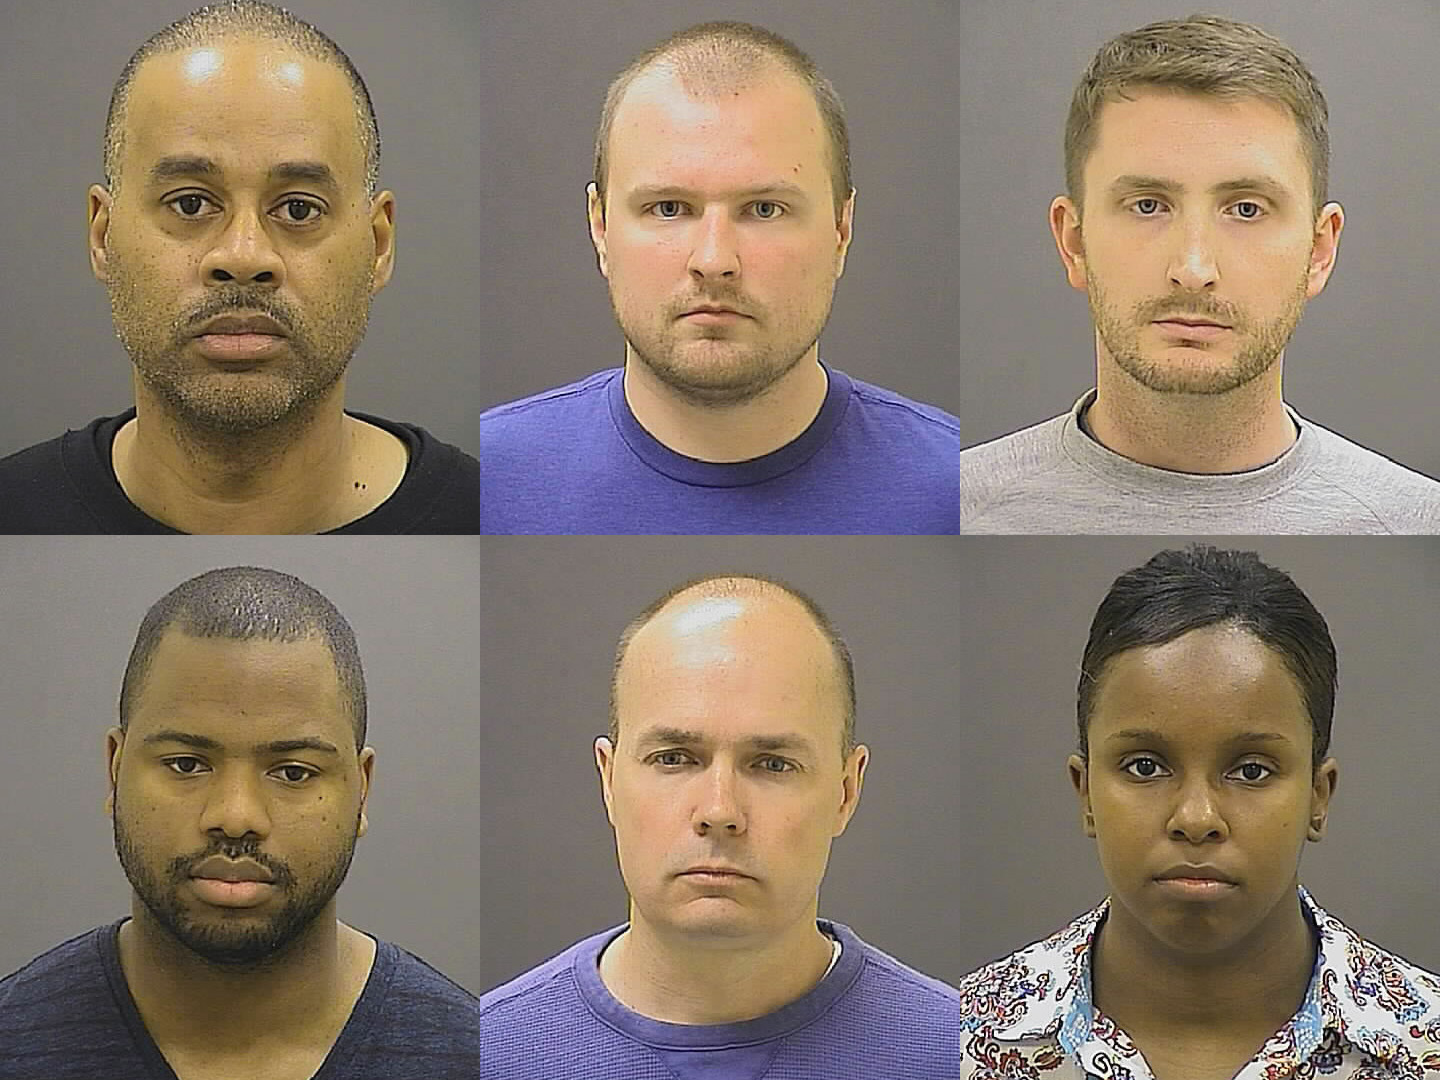 A photo provided by the Baltimore Police Department on Friday shows, top row from left, Caesar R. Goodson Jr., Garrett E. Miller and Edward M. Nero, and bottom row from left, William G. Porter, Brian W. Rice and Alicia D. White, the six police officers charged with felonies ranging from assault to murder in the death of Freddie Gray (Photo courtesy Uncredited/AP)